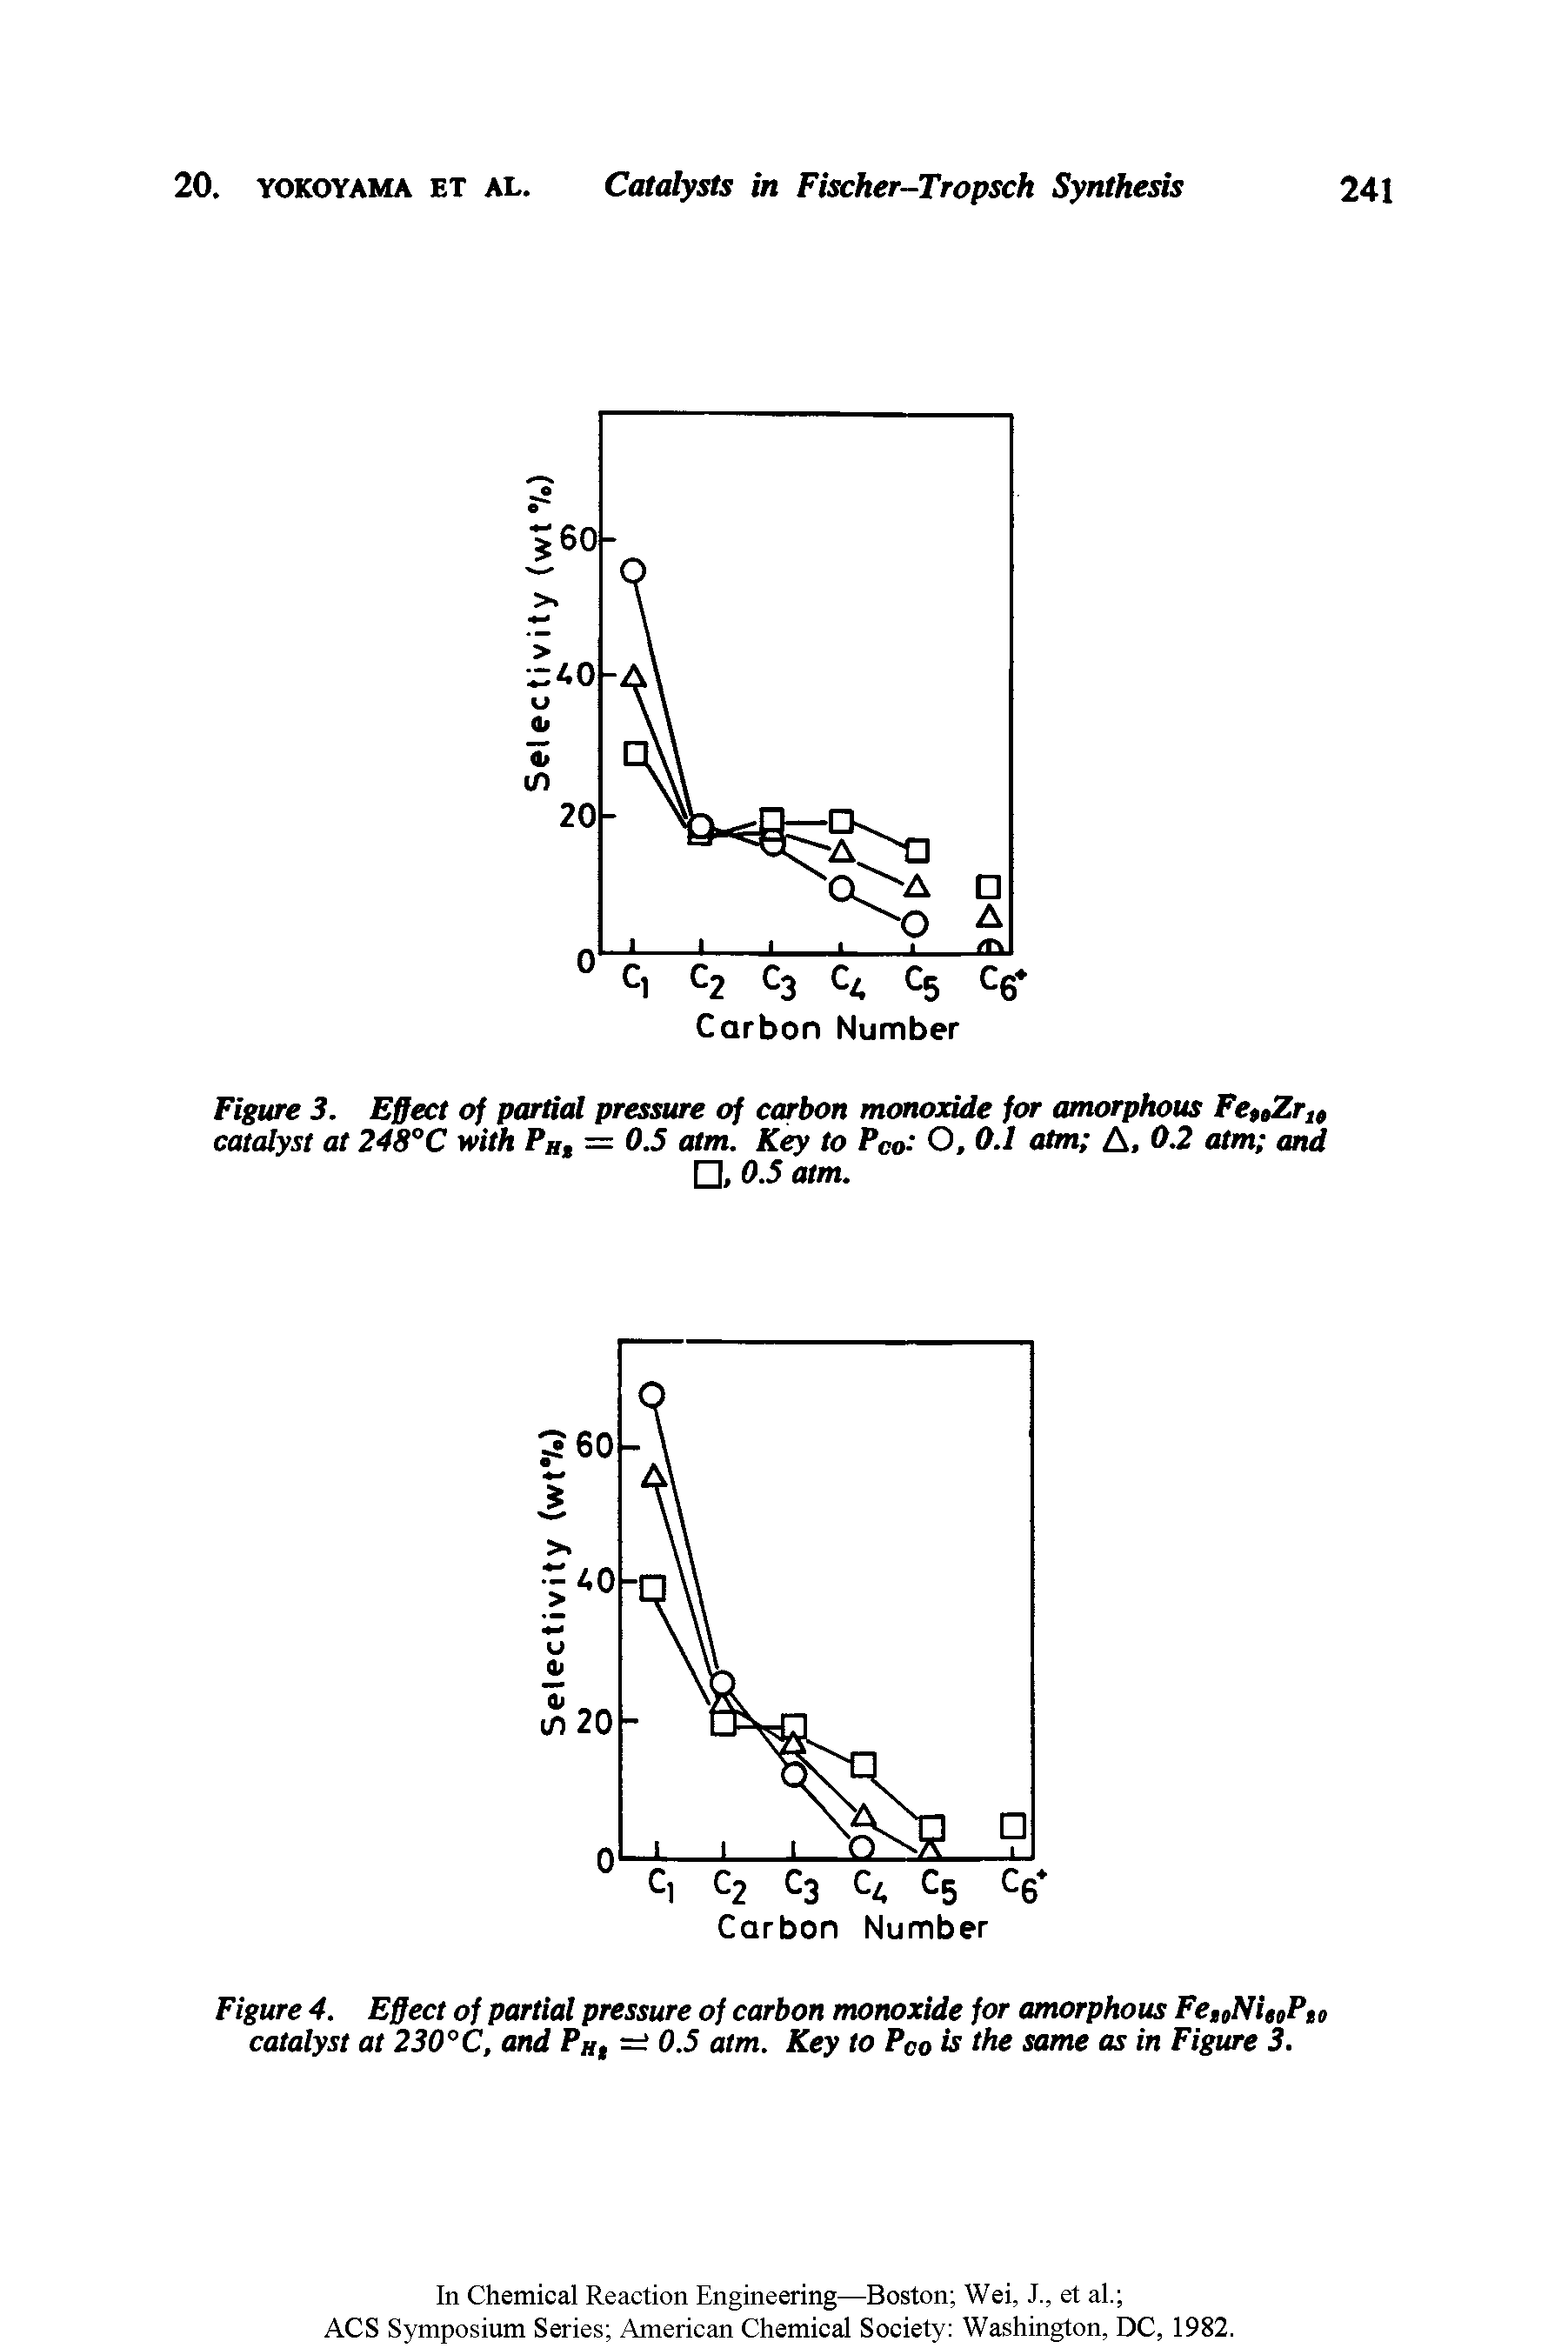 Figure 4. Effect of partial pressure of carbon monoxide for amorphous Fe,0NitoPti> catalyst at 230°C, and PH, — 0.5 atm. Key to PCo is the same as in Figure 3.